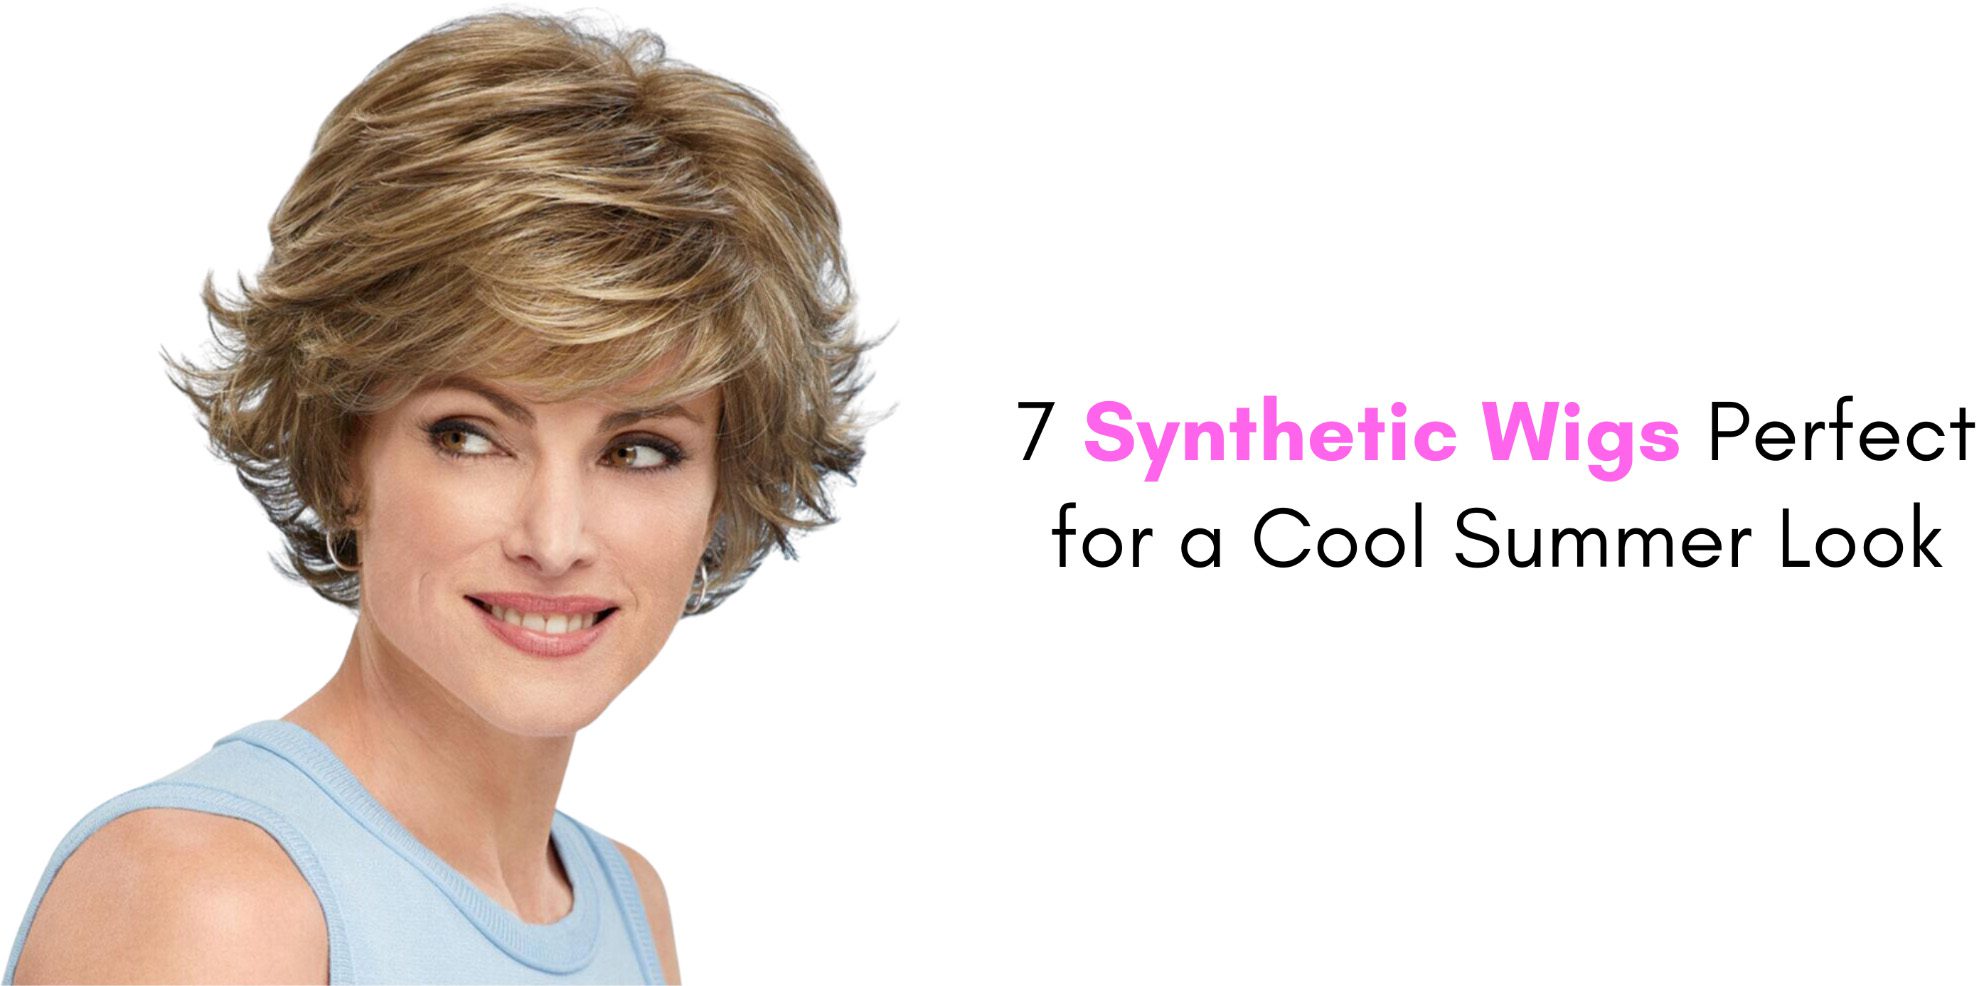 7 Synthetic Wigs Perfect for a Cool Summer Look